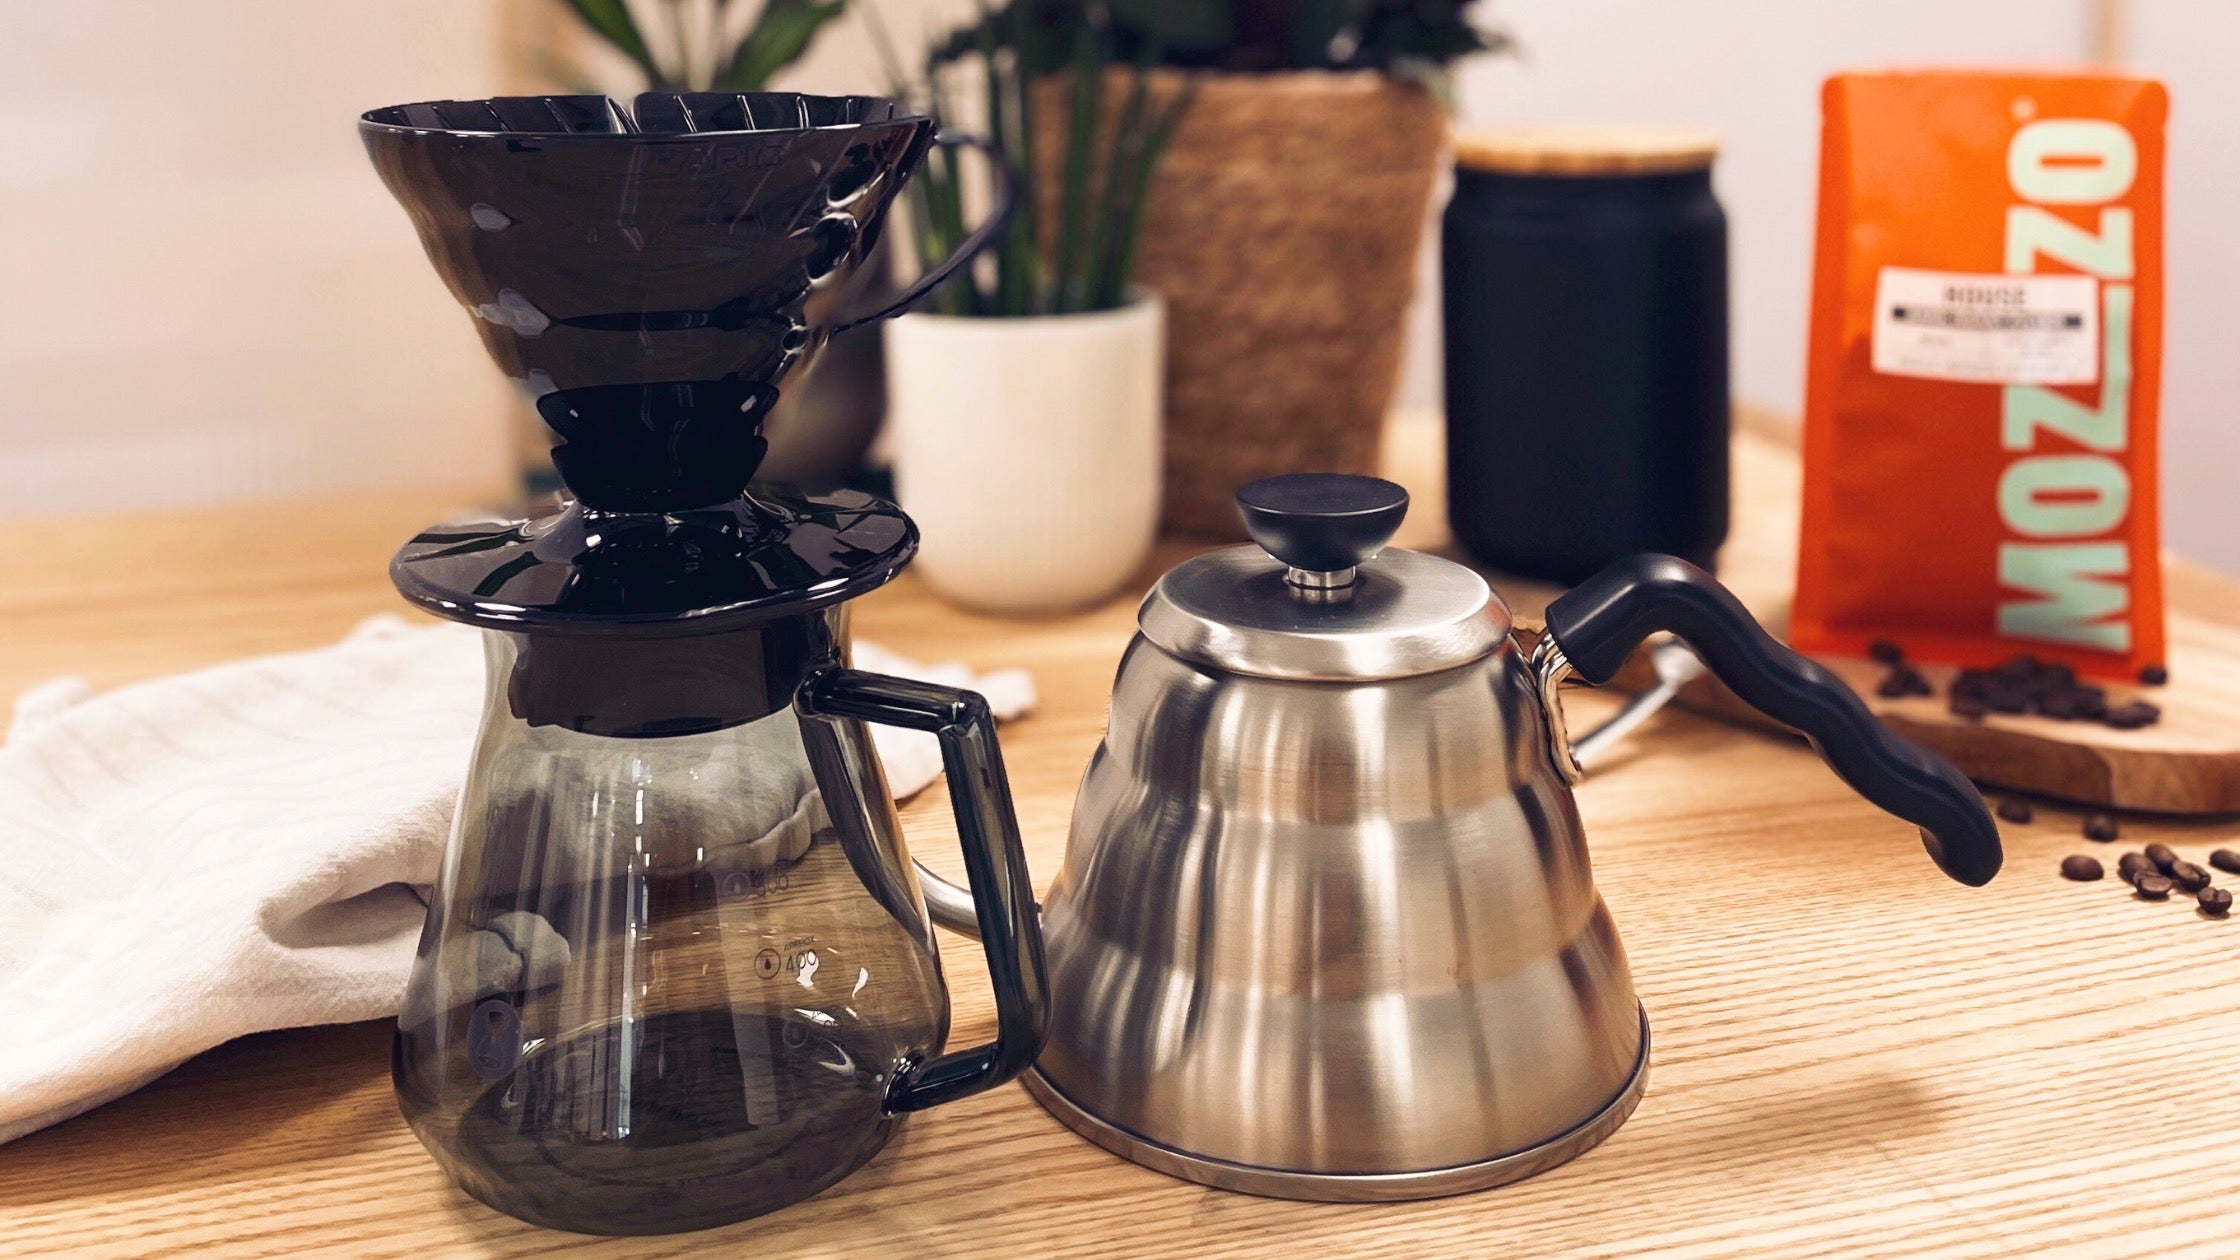 V60 brewing kit with a Mozzo coffee bag